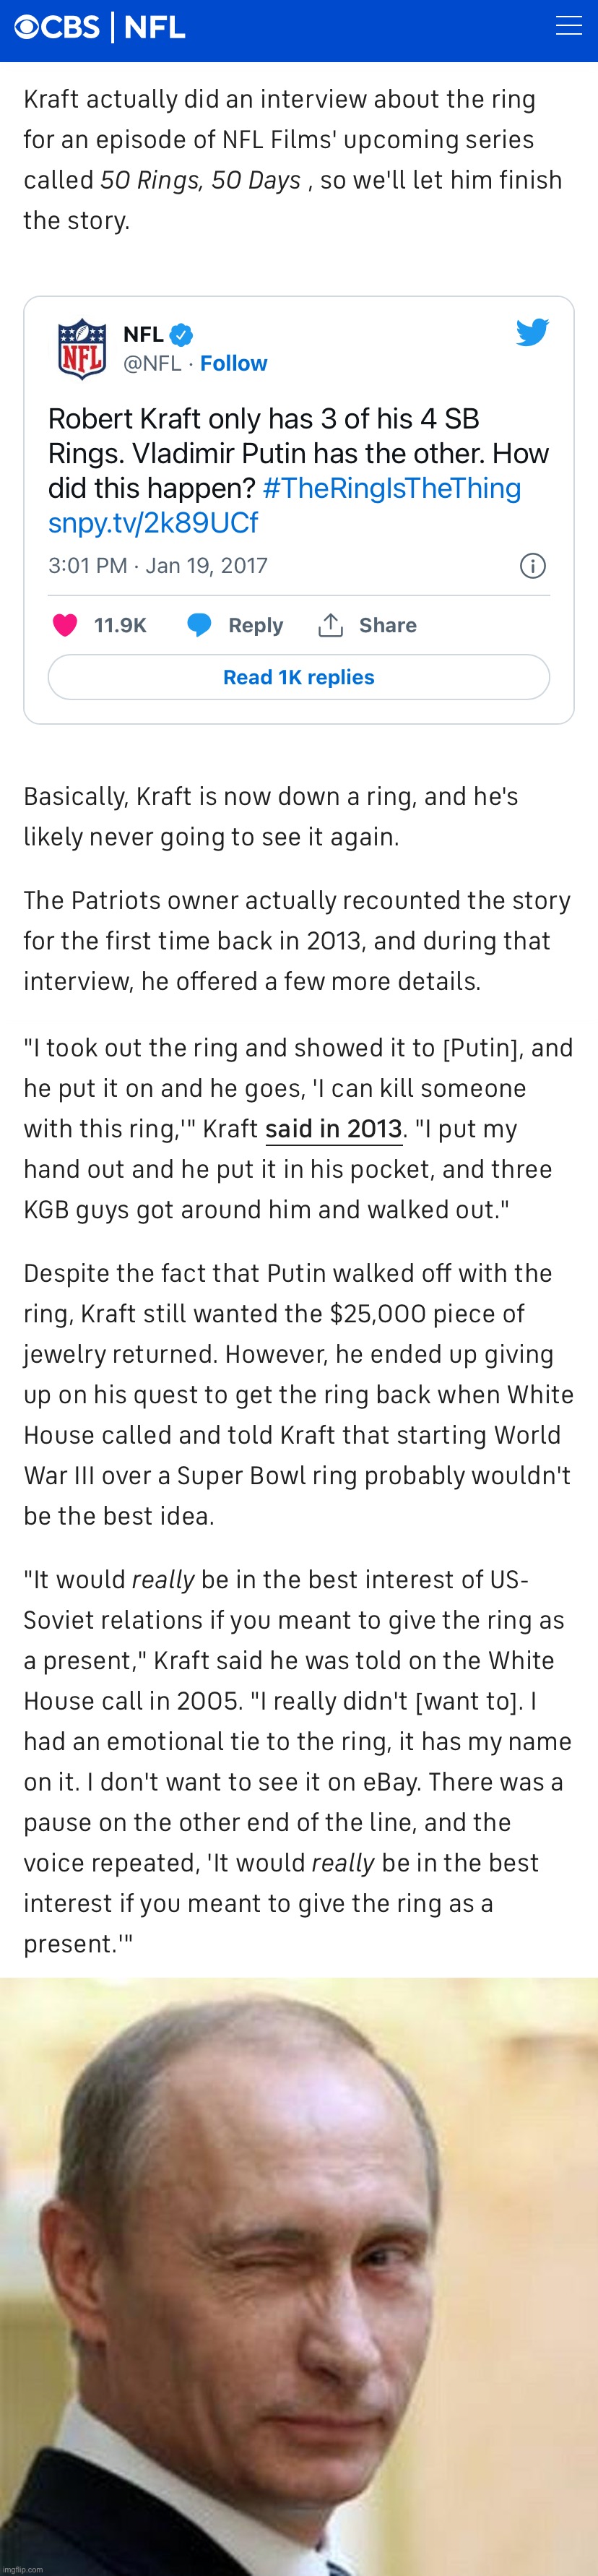 That one time Putin made off with a Super Bowl ring — all you need to know about his way of doing business. | image tagged in vladimir putin steals super bowl ring,putin winking,vladimir putin,putin,super bowl,ring | made w/ Imgflip meme maker